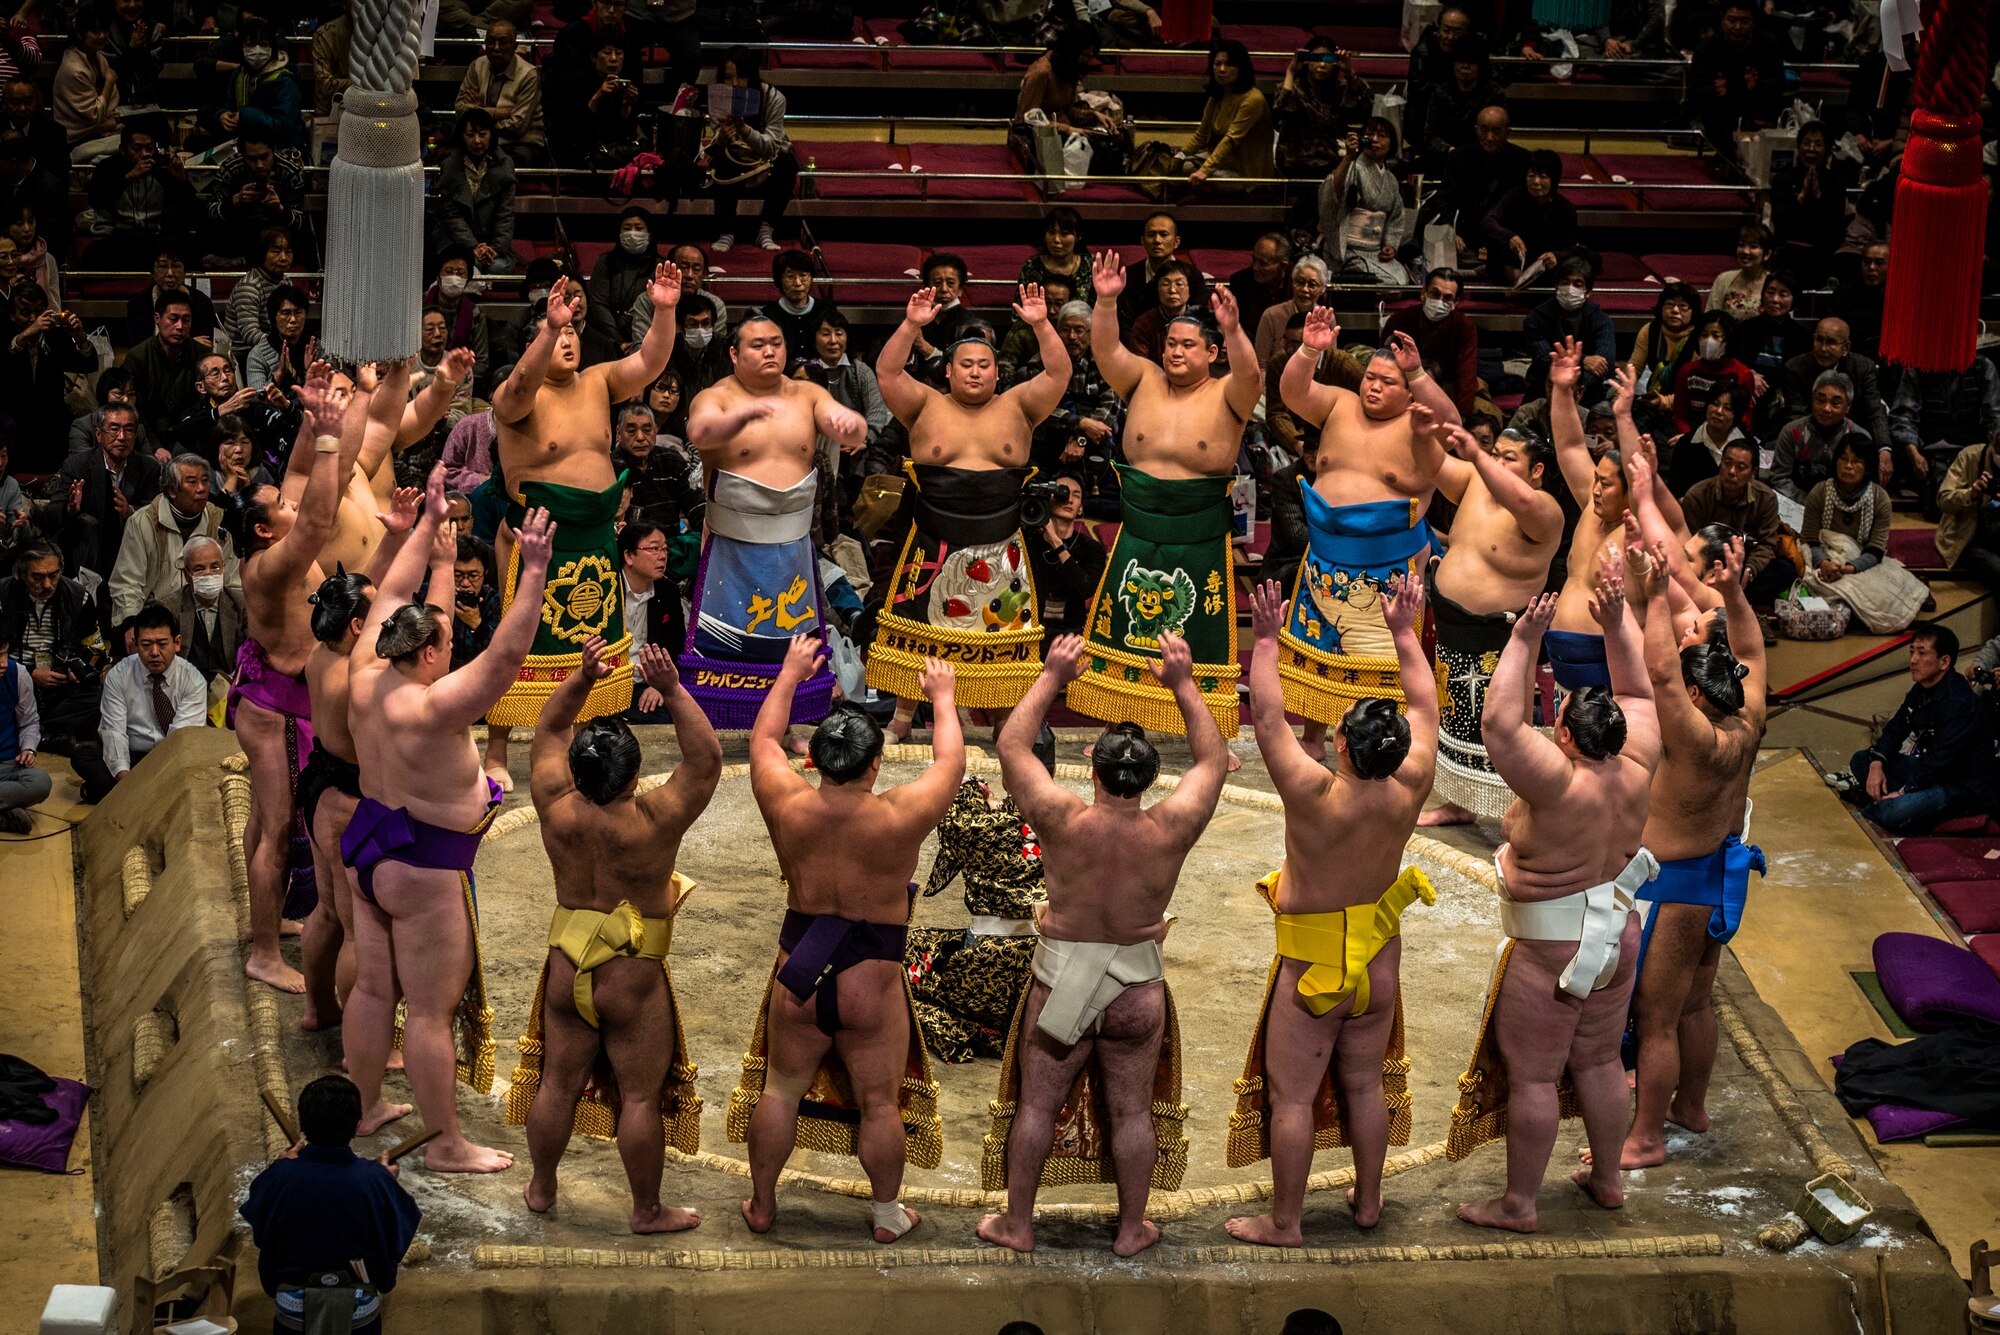 YOKOTA AIR BASE,Japan--Top division Sumo wrestlers form a circle at the opening ceremony of the Grand Sumo Tournament at the Ryogoku Kokugikan Sumo Hall in Tokyo, Feb. 10, 2013. Sumo involves several ritual elements developed over a history of centuries. (U.S. Air Force photo by Capt. Raymond Geoffroy)